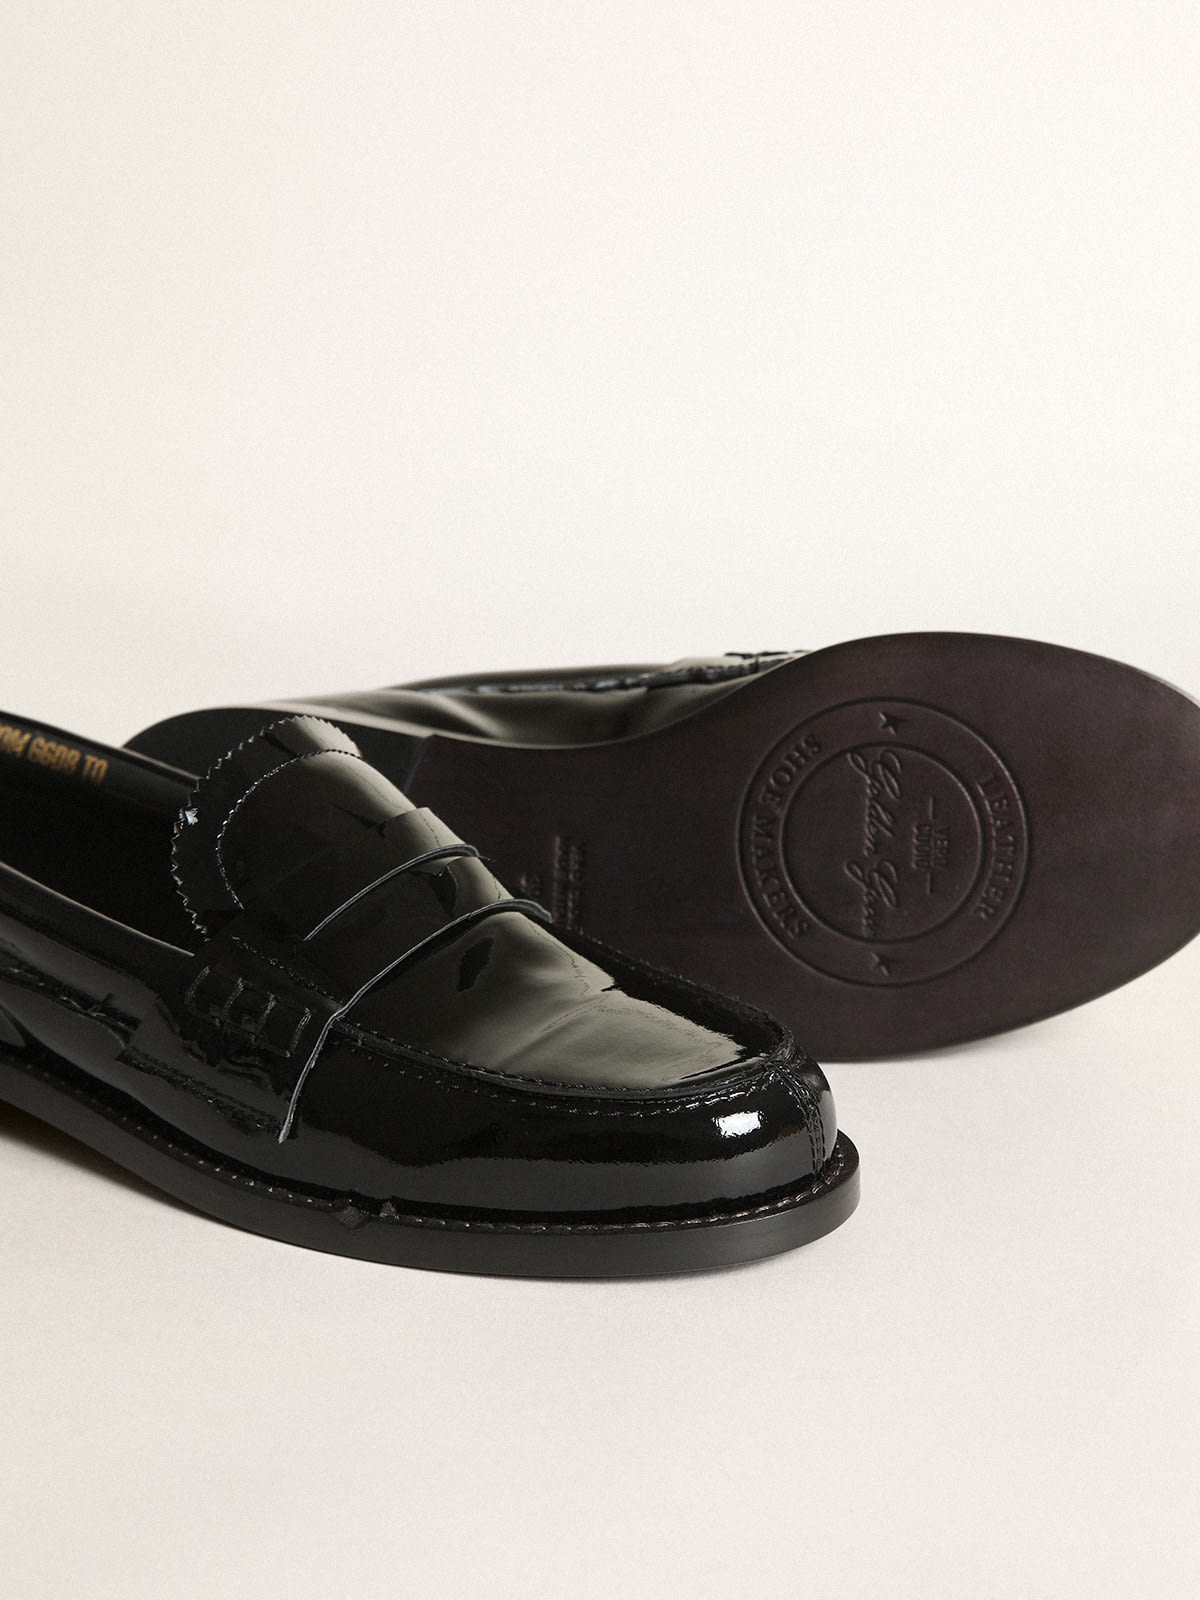 Golden Goose - Jerry loafer in black patent leather in 